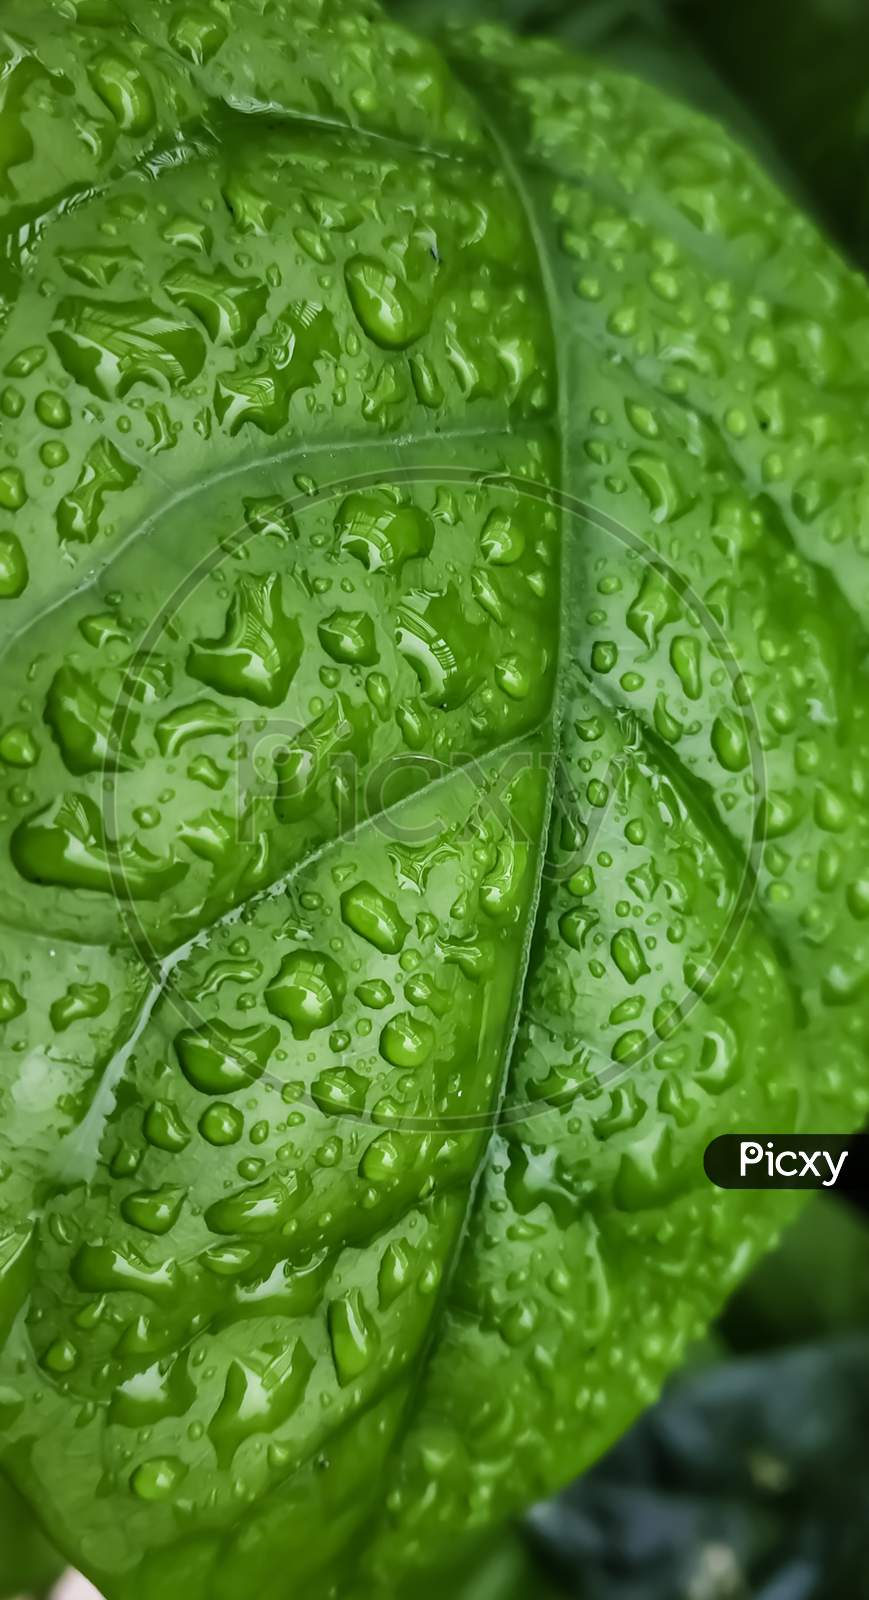 A green leaf with rain water droplets on it